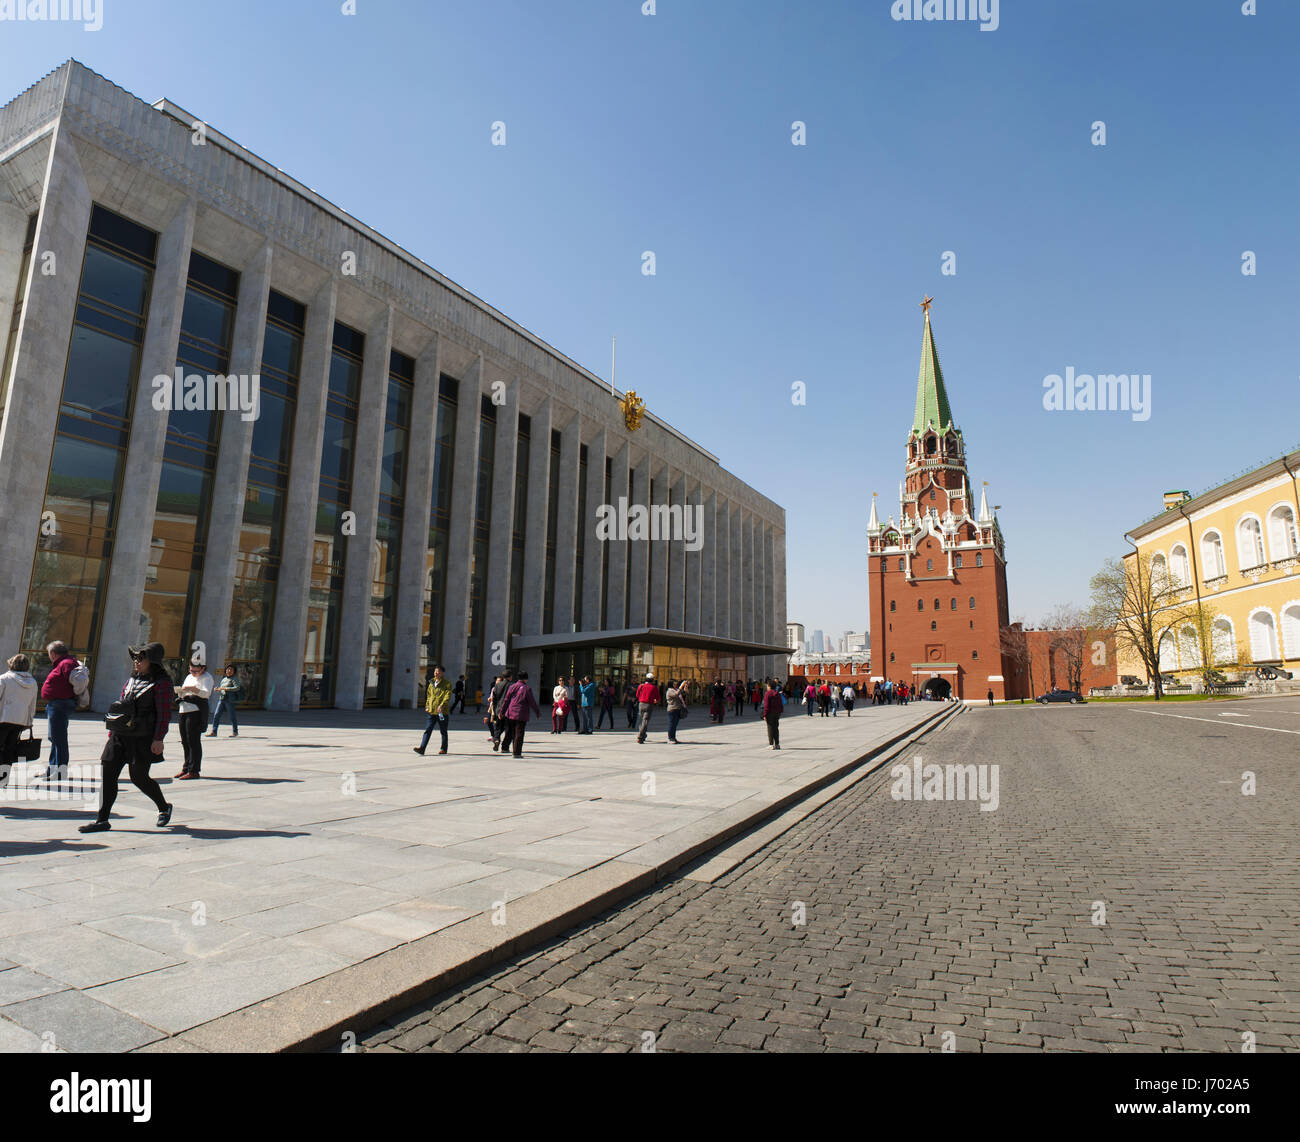 Moscow Kremlin, Russia: the State Kremlin Palace, the Troitskaya Tower (Trinity Tower) and the Arsenal, a former armory built in 1736 Stock Photo